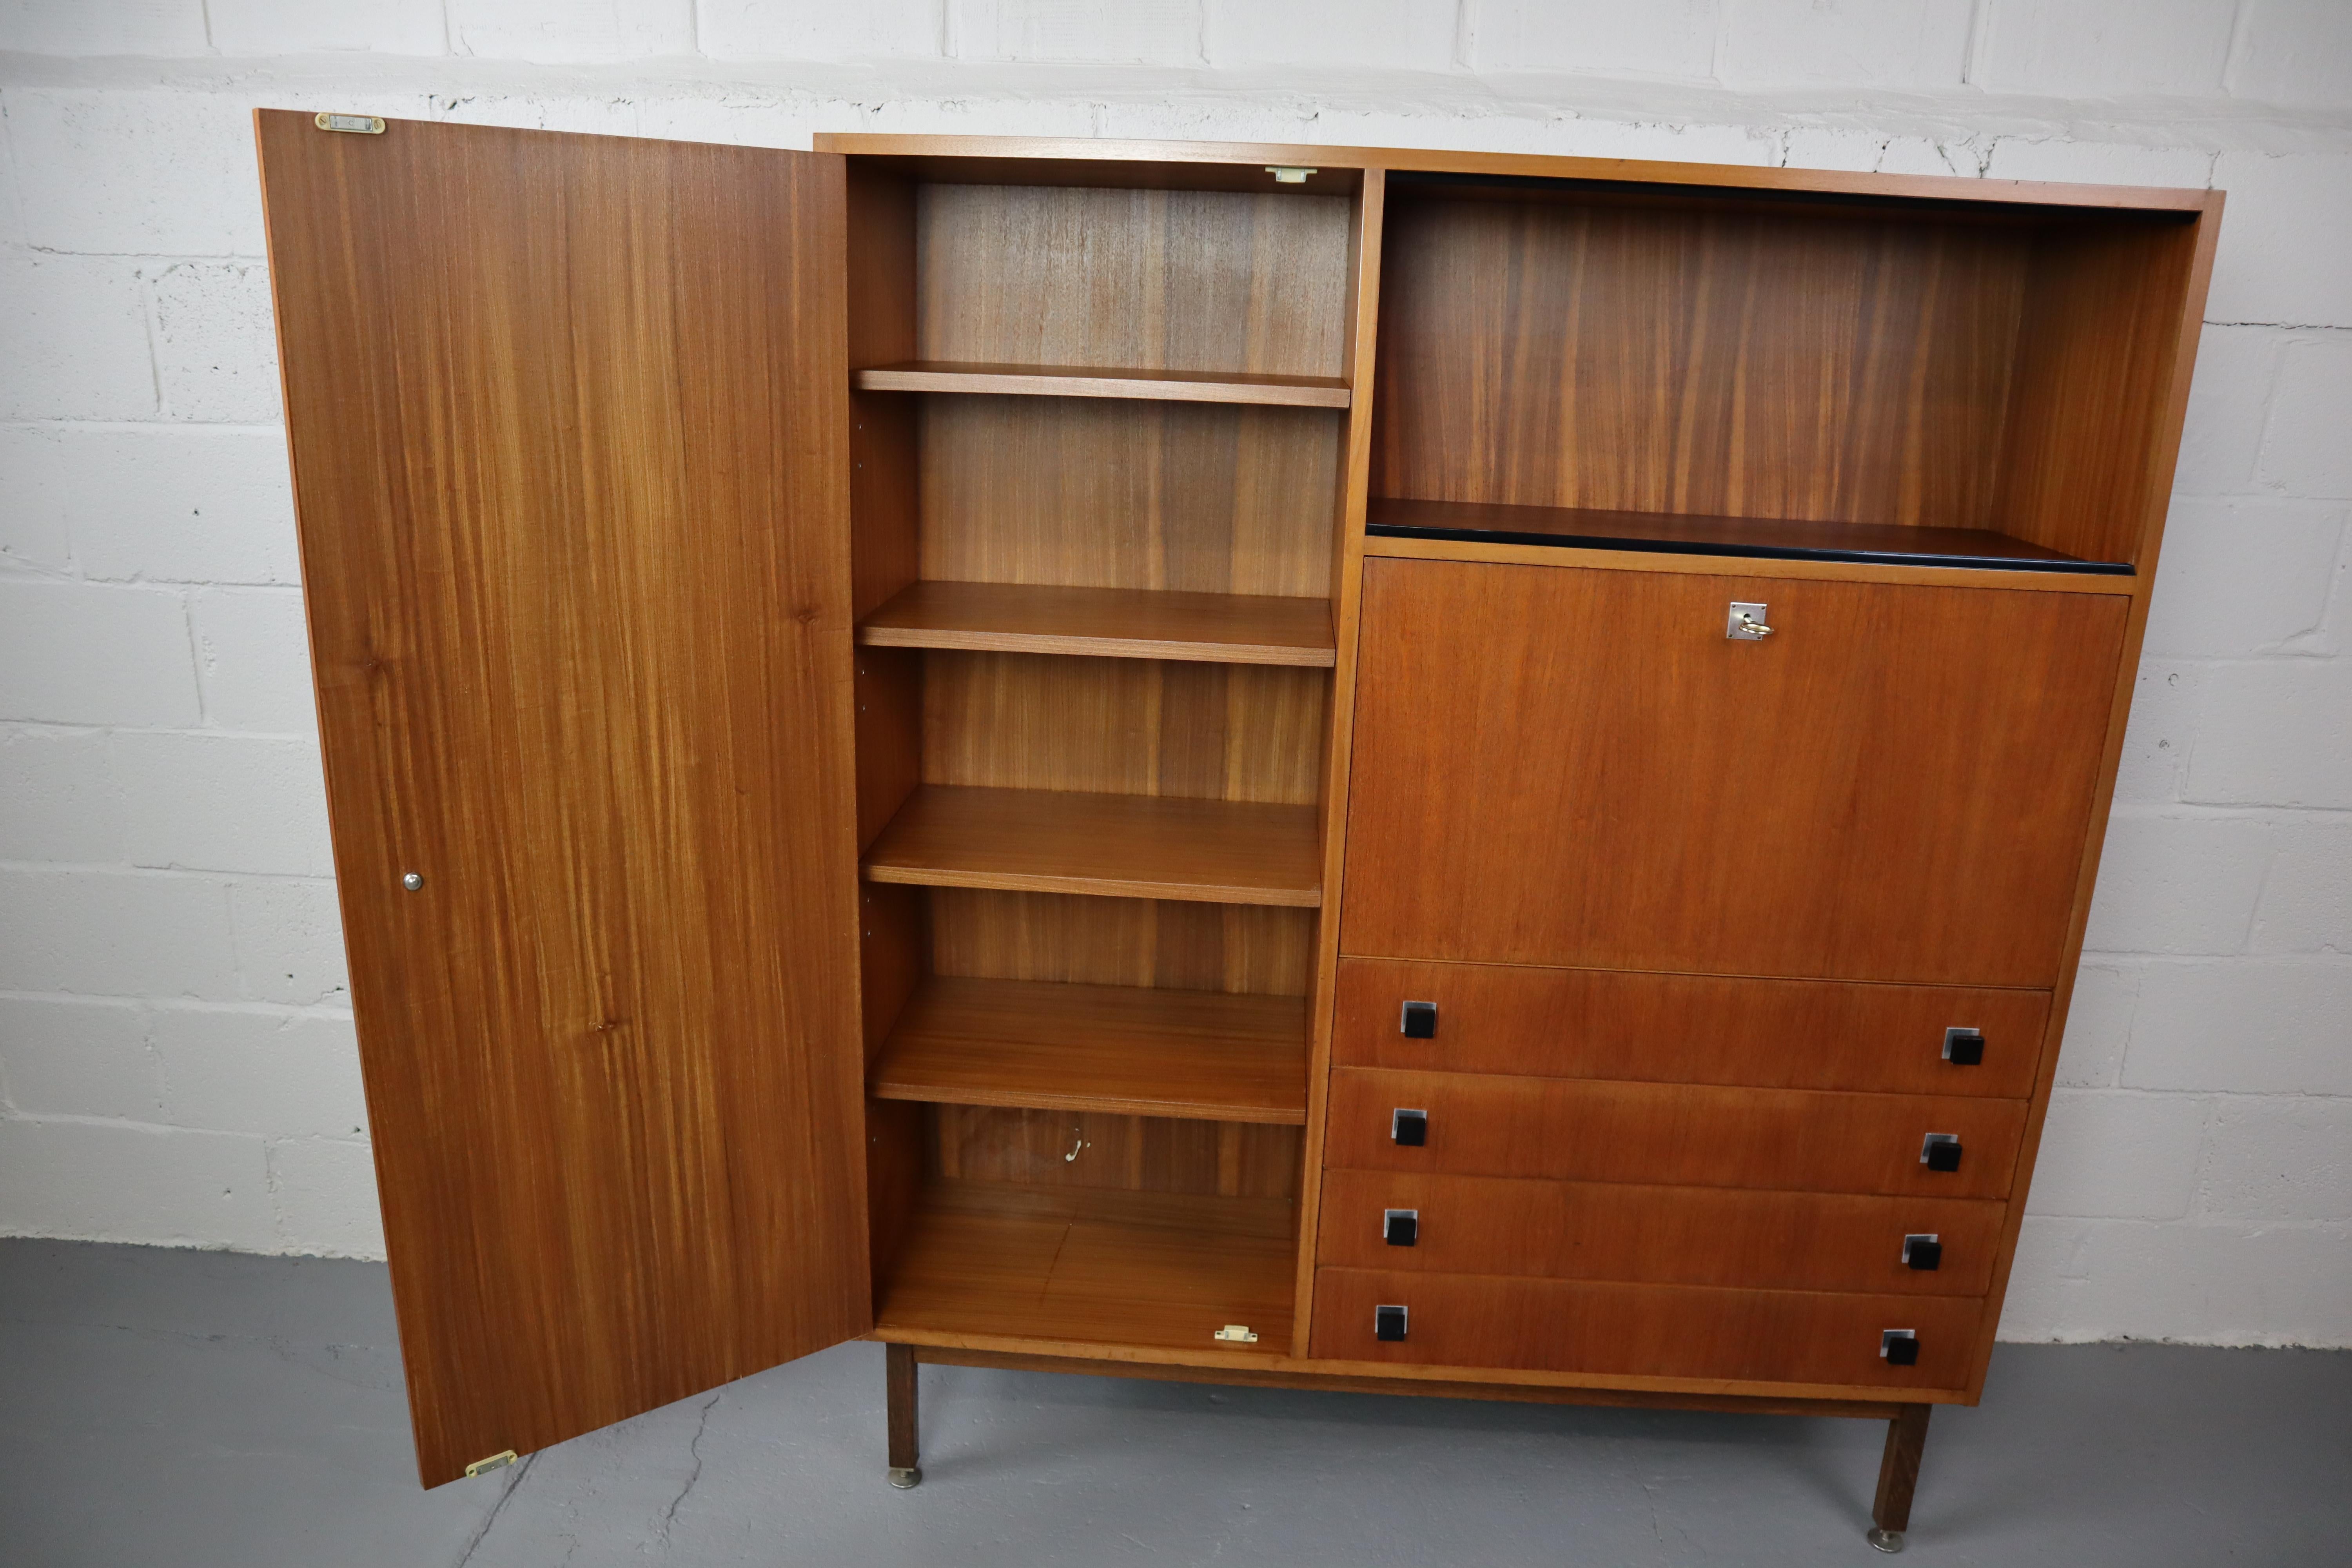 Vintage teak highboard from Combineurop Belgium, 1960's. This cabinet has 4 drawers, bar cabinet/secretaire, high door with 5 shelves and 2 glass display doors.
See also the aluminium black lacquered handles, typical for Combineurop.
The base is in